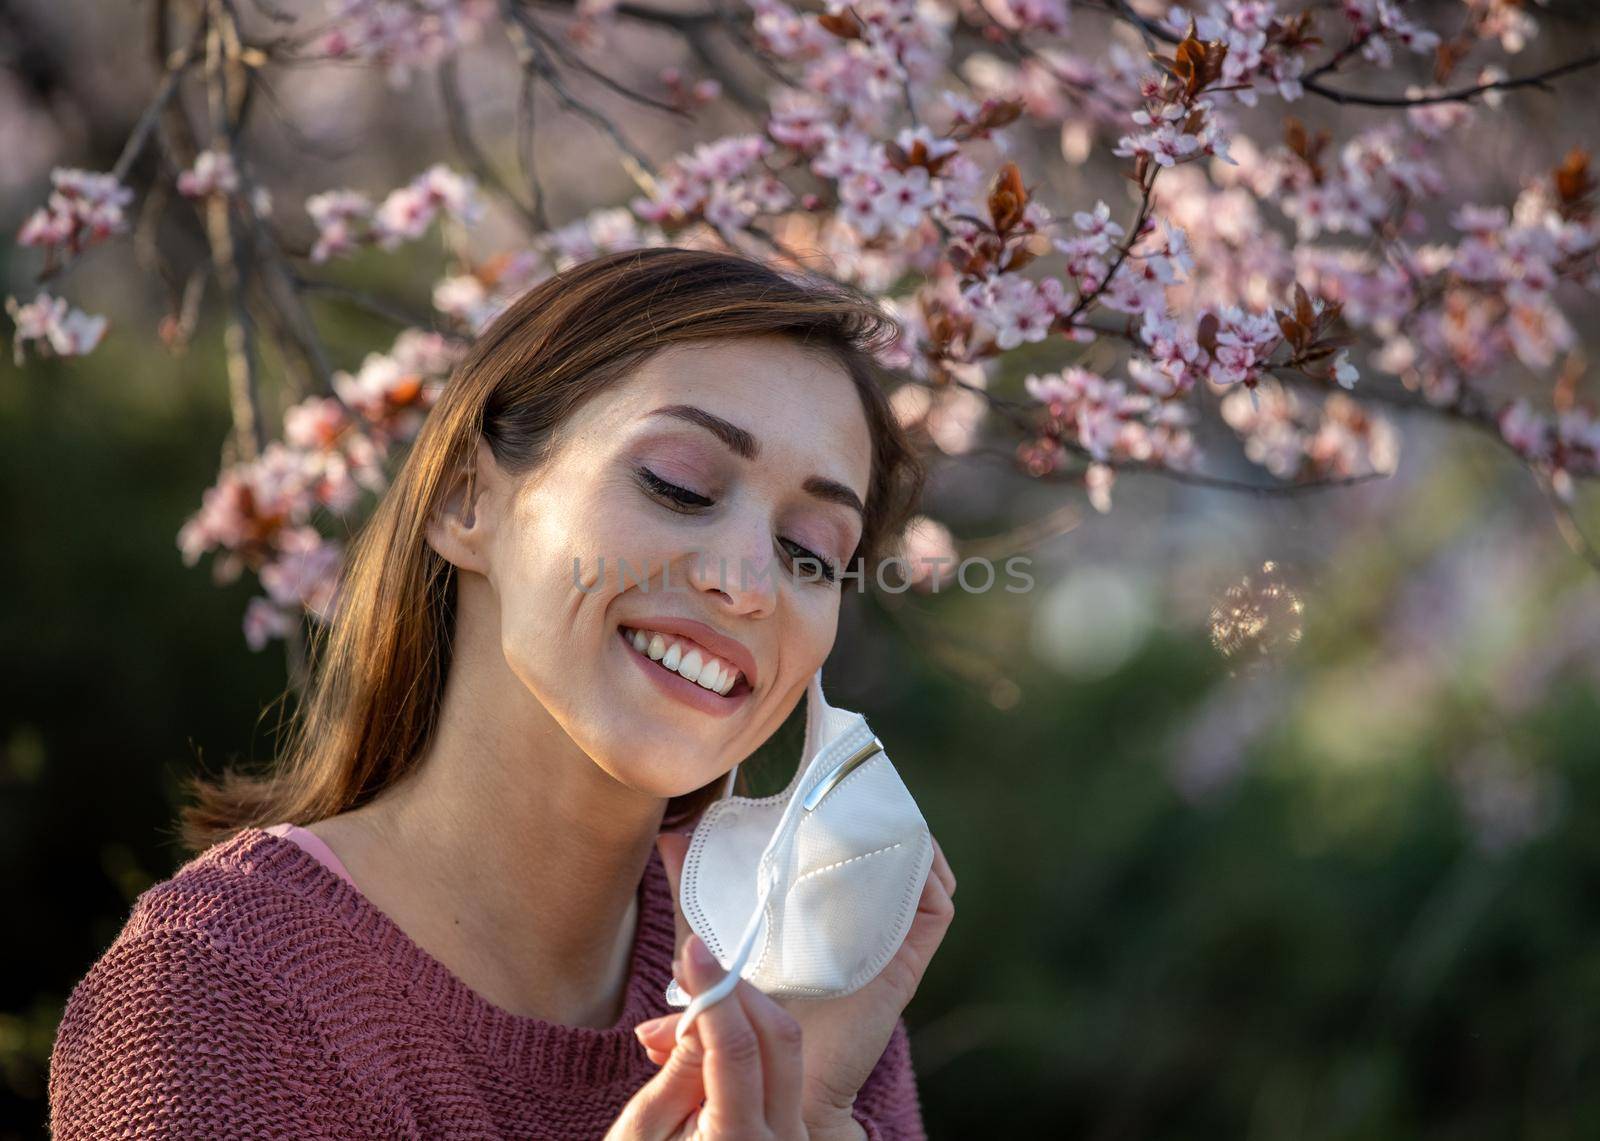 Smiling young woman putting facial mask on and looking at blooming tree. Spring allergy attack protection